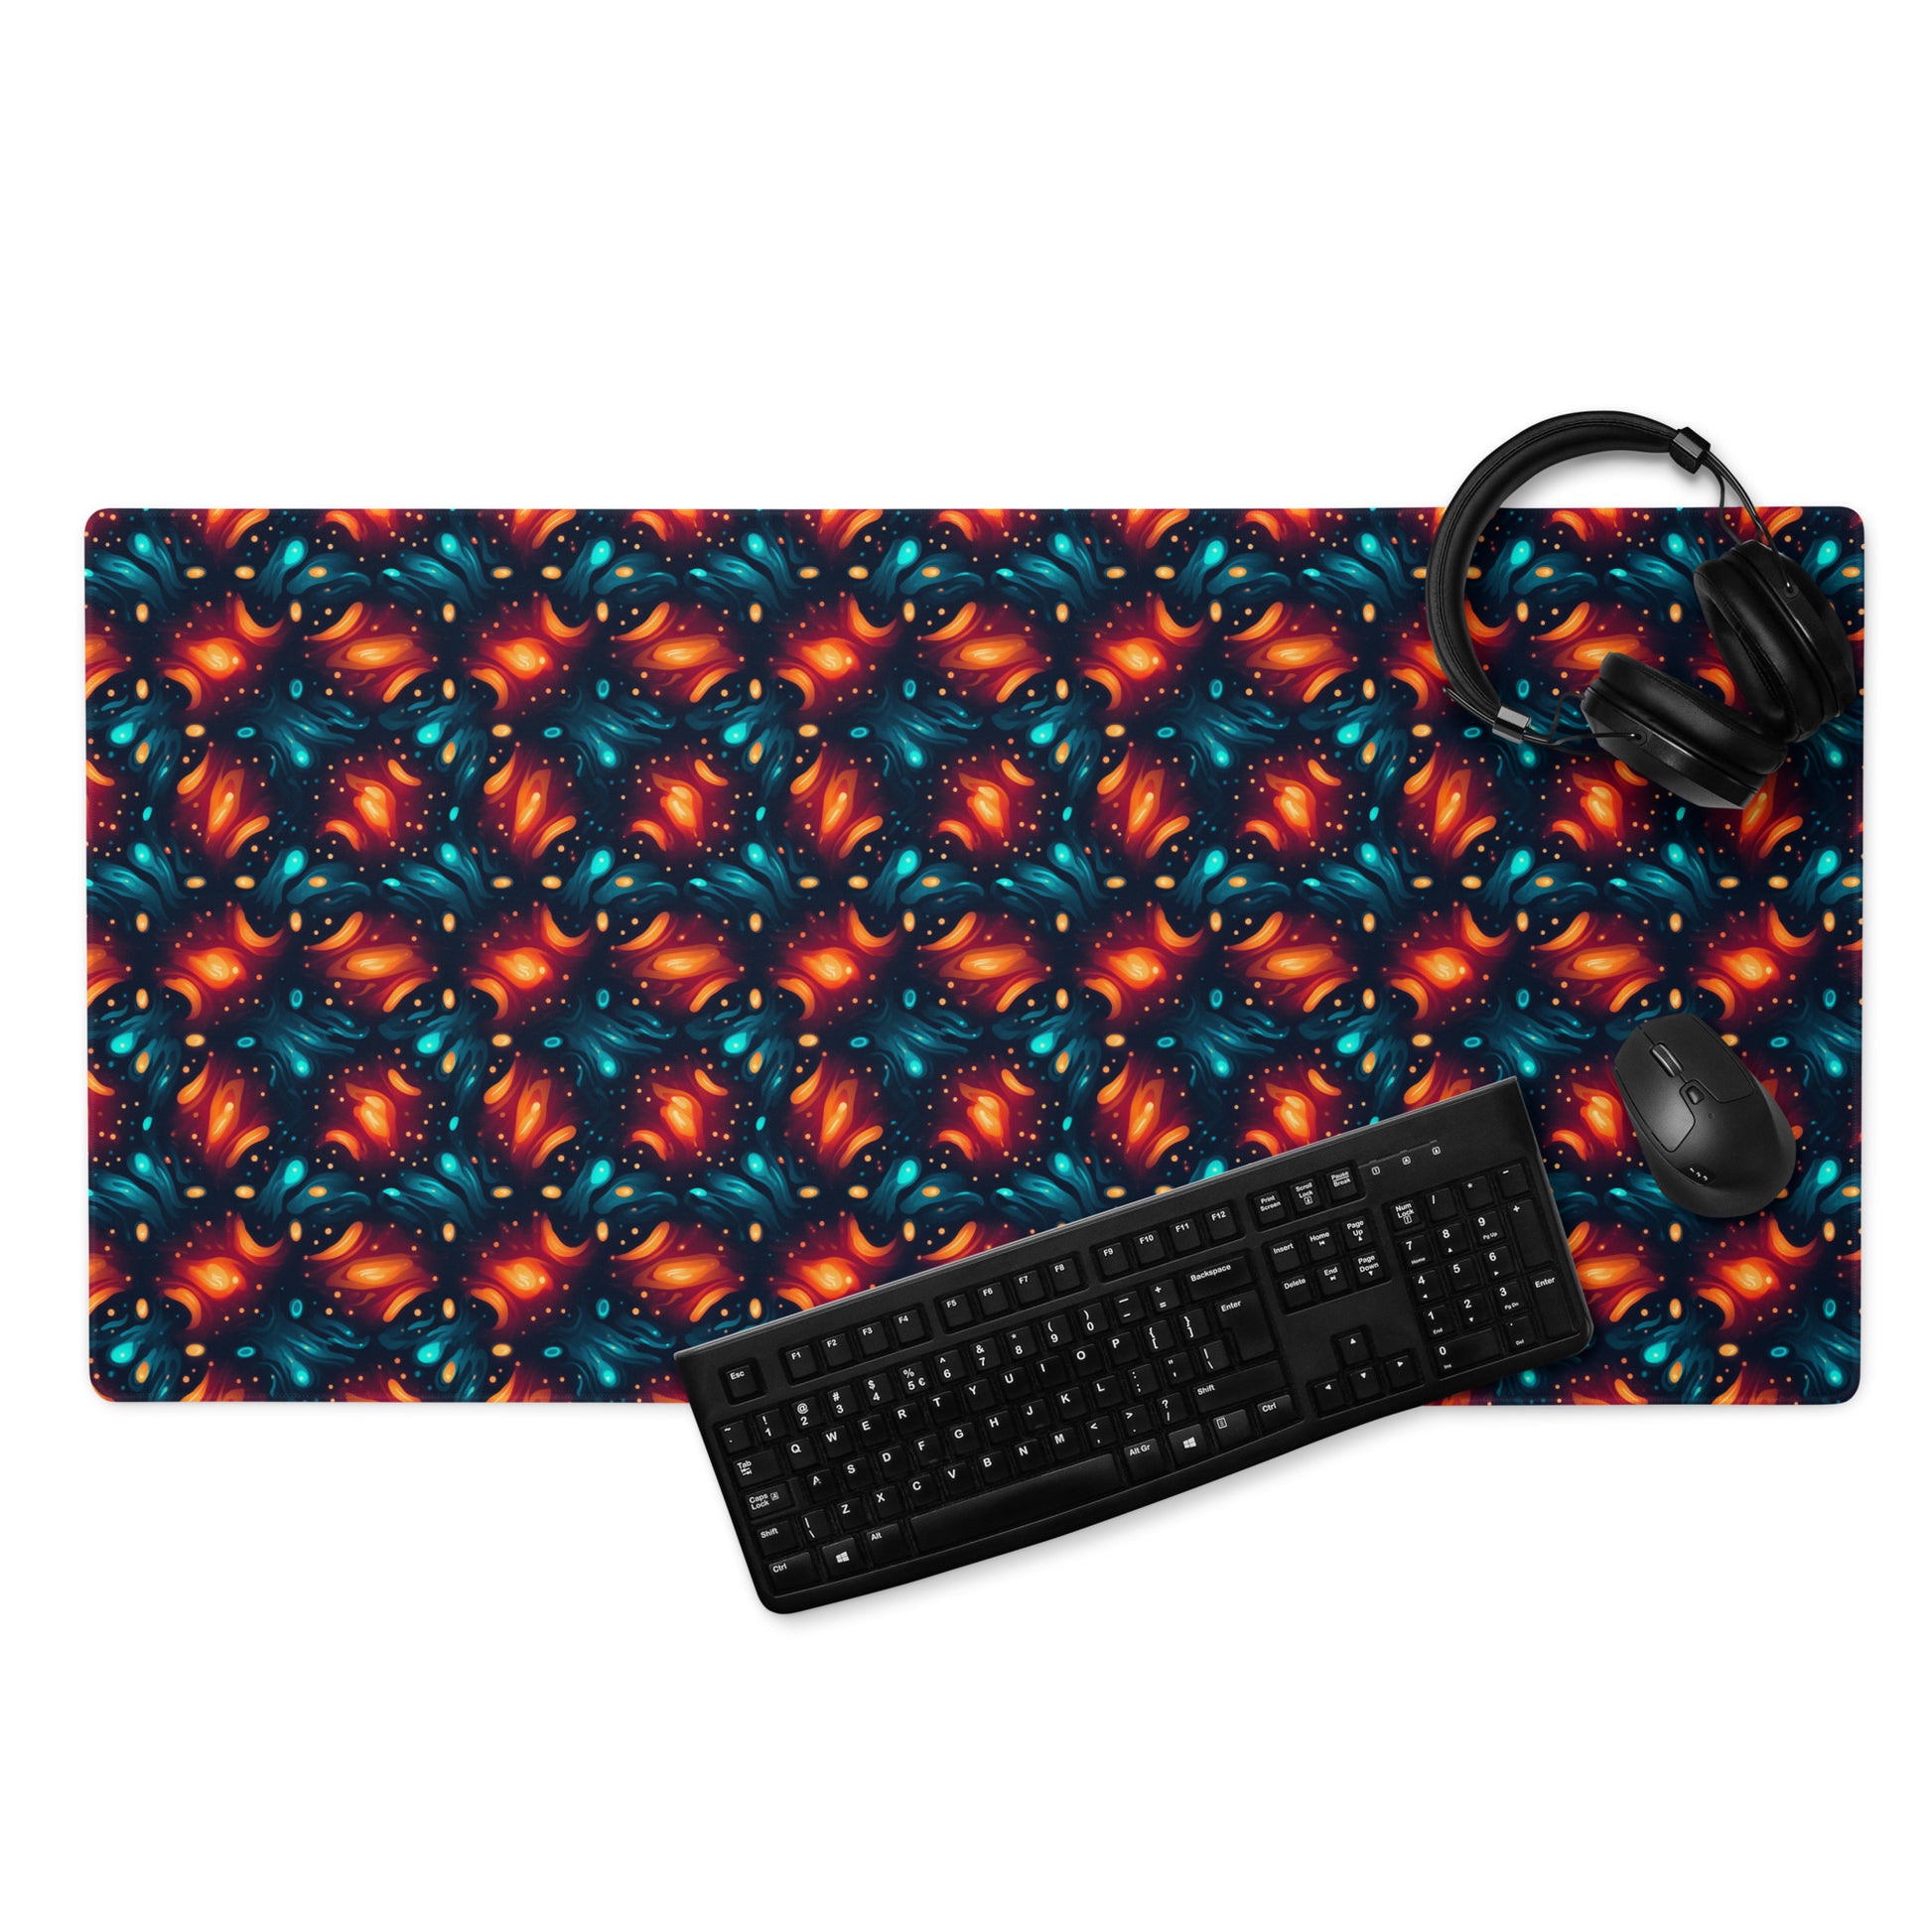 A 36" x 18" desk pad with a blue and orange abstract cross hatch pattern. With a keyboard, mouse, and headphones sitting on it.